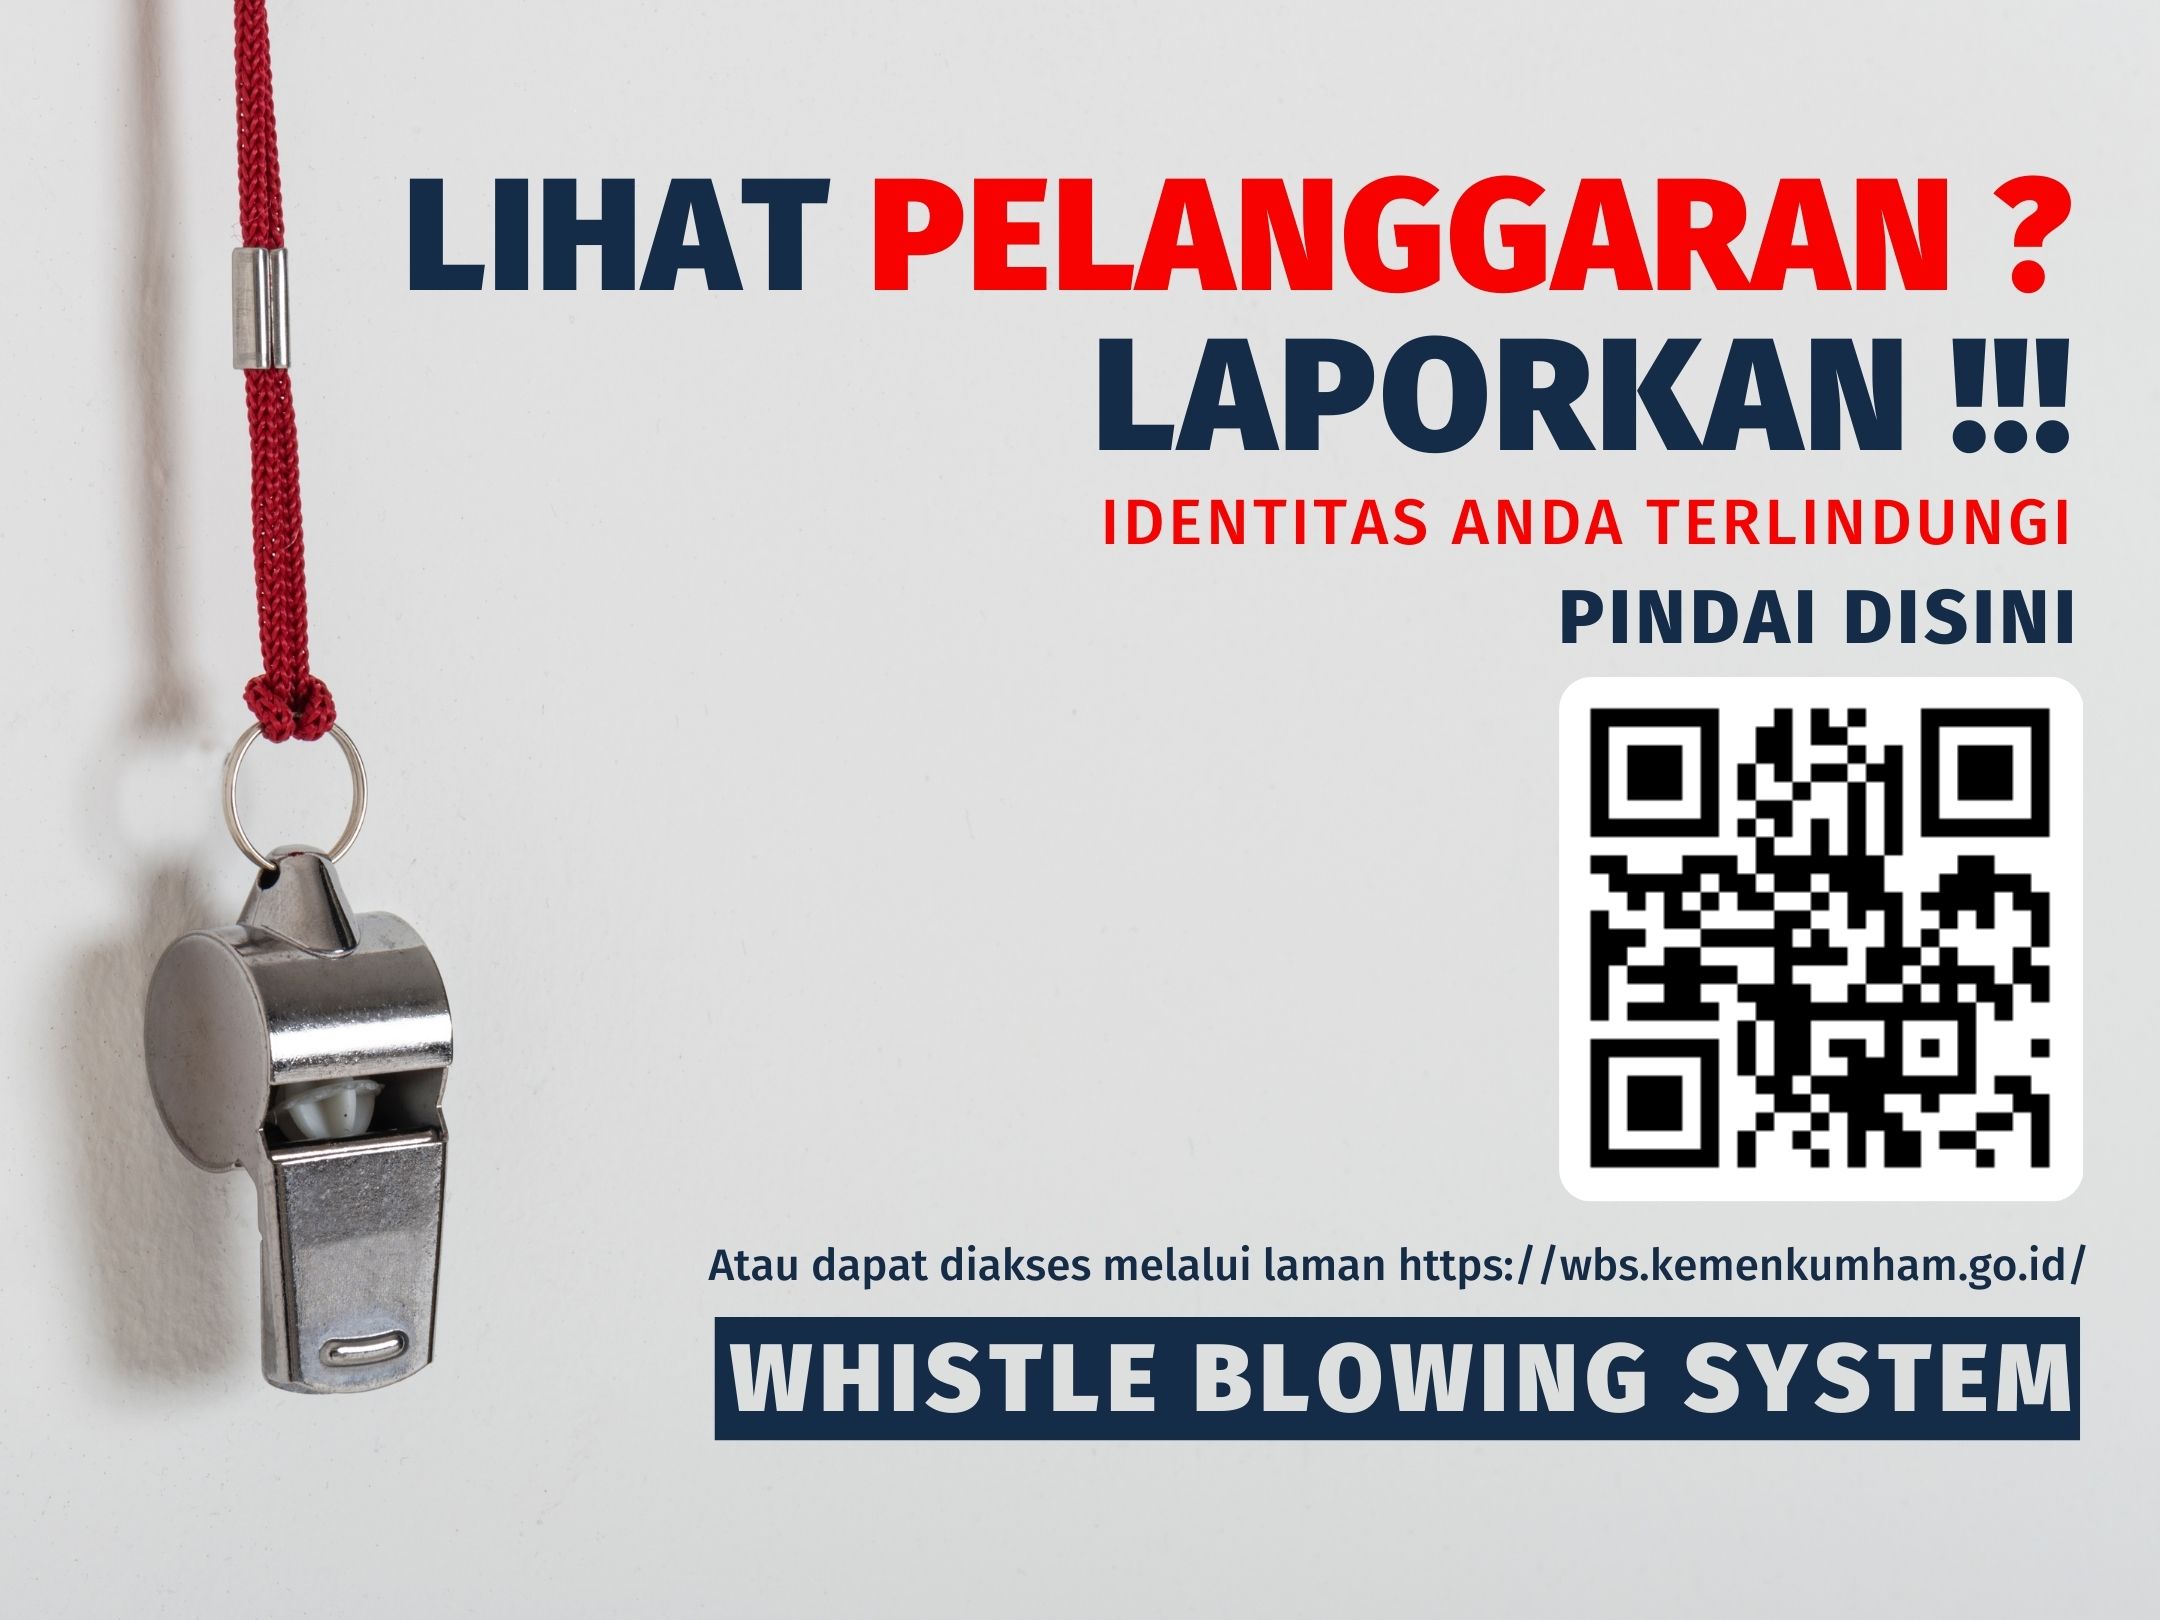 Whistle Blowing System